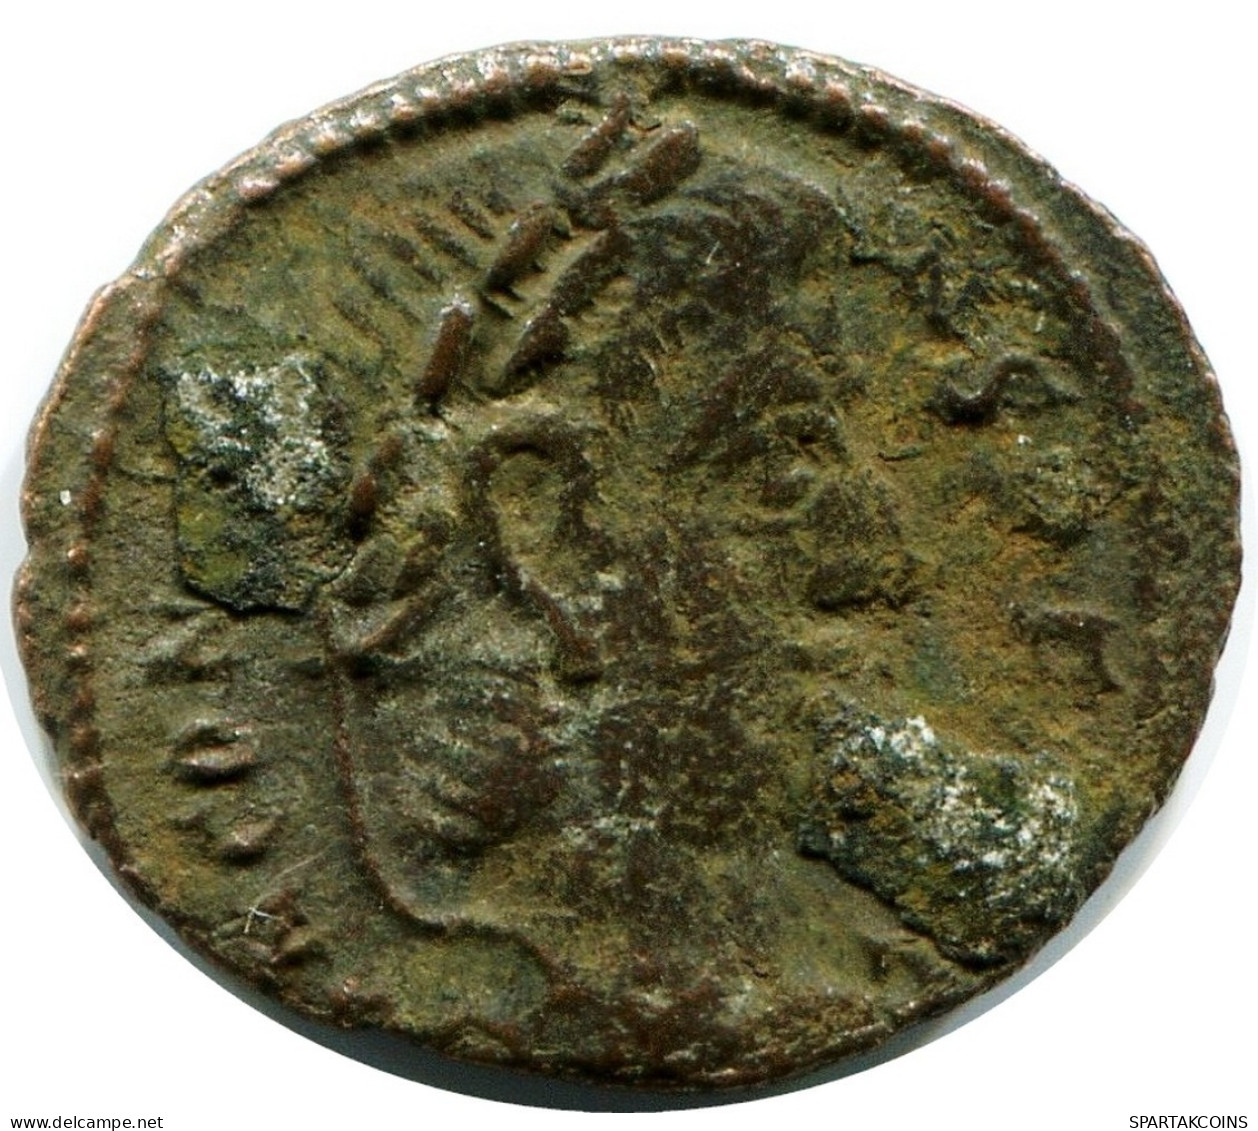 CONSTANS MINTED IN CYZICUS FROM THE ROYAL ONTARIO MUSEUM #ANC11631.14.F.A - The Christian Empire (307 AD Tot 363 AD)